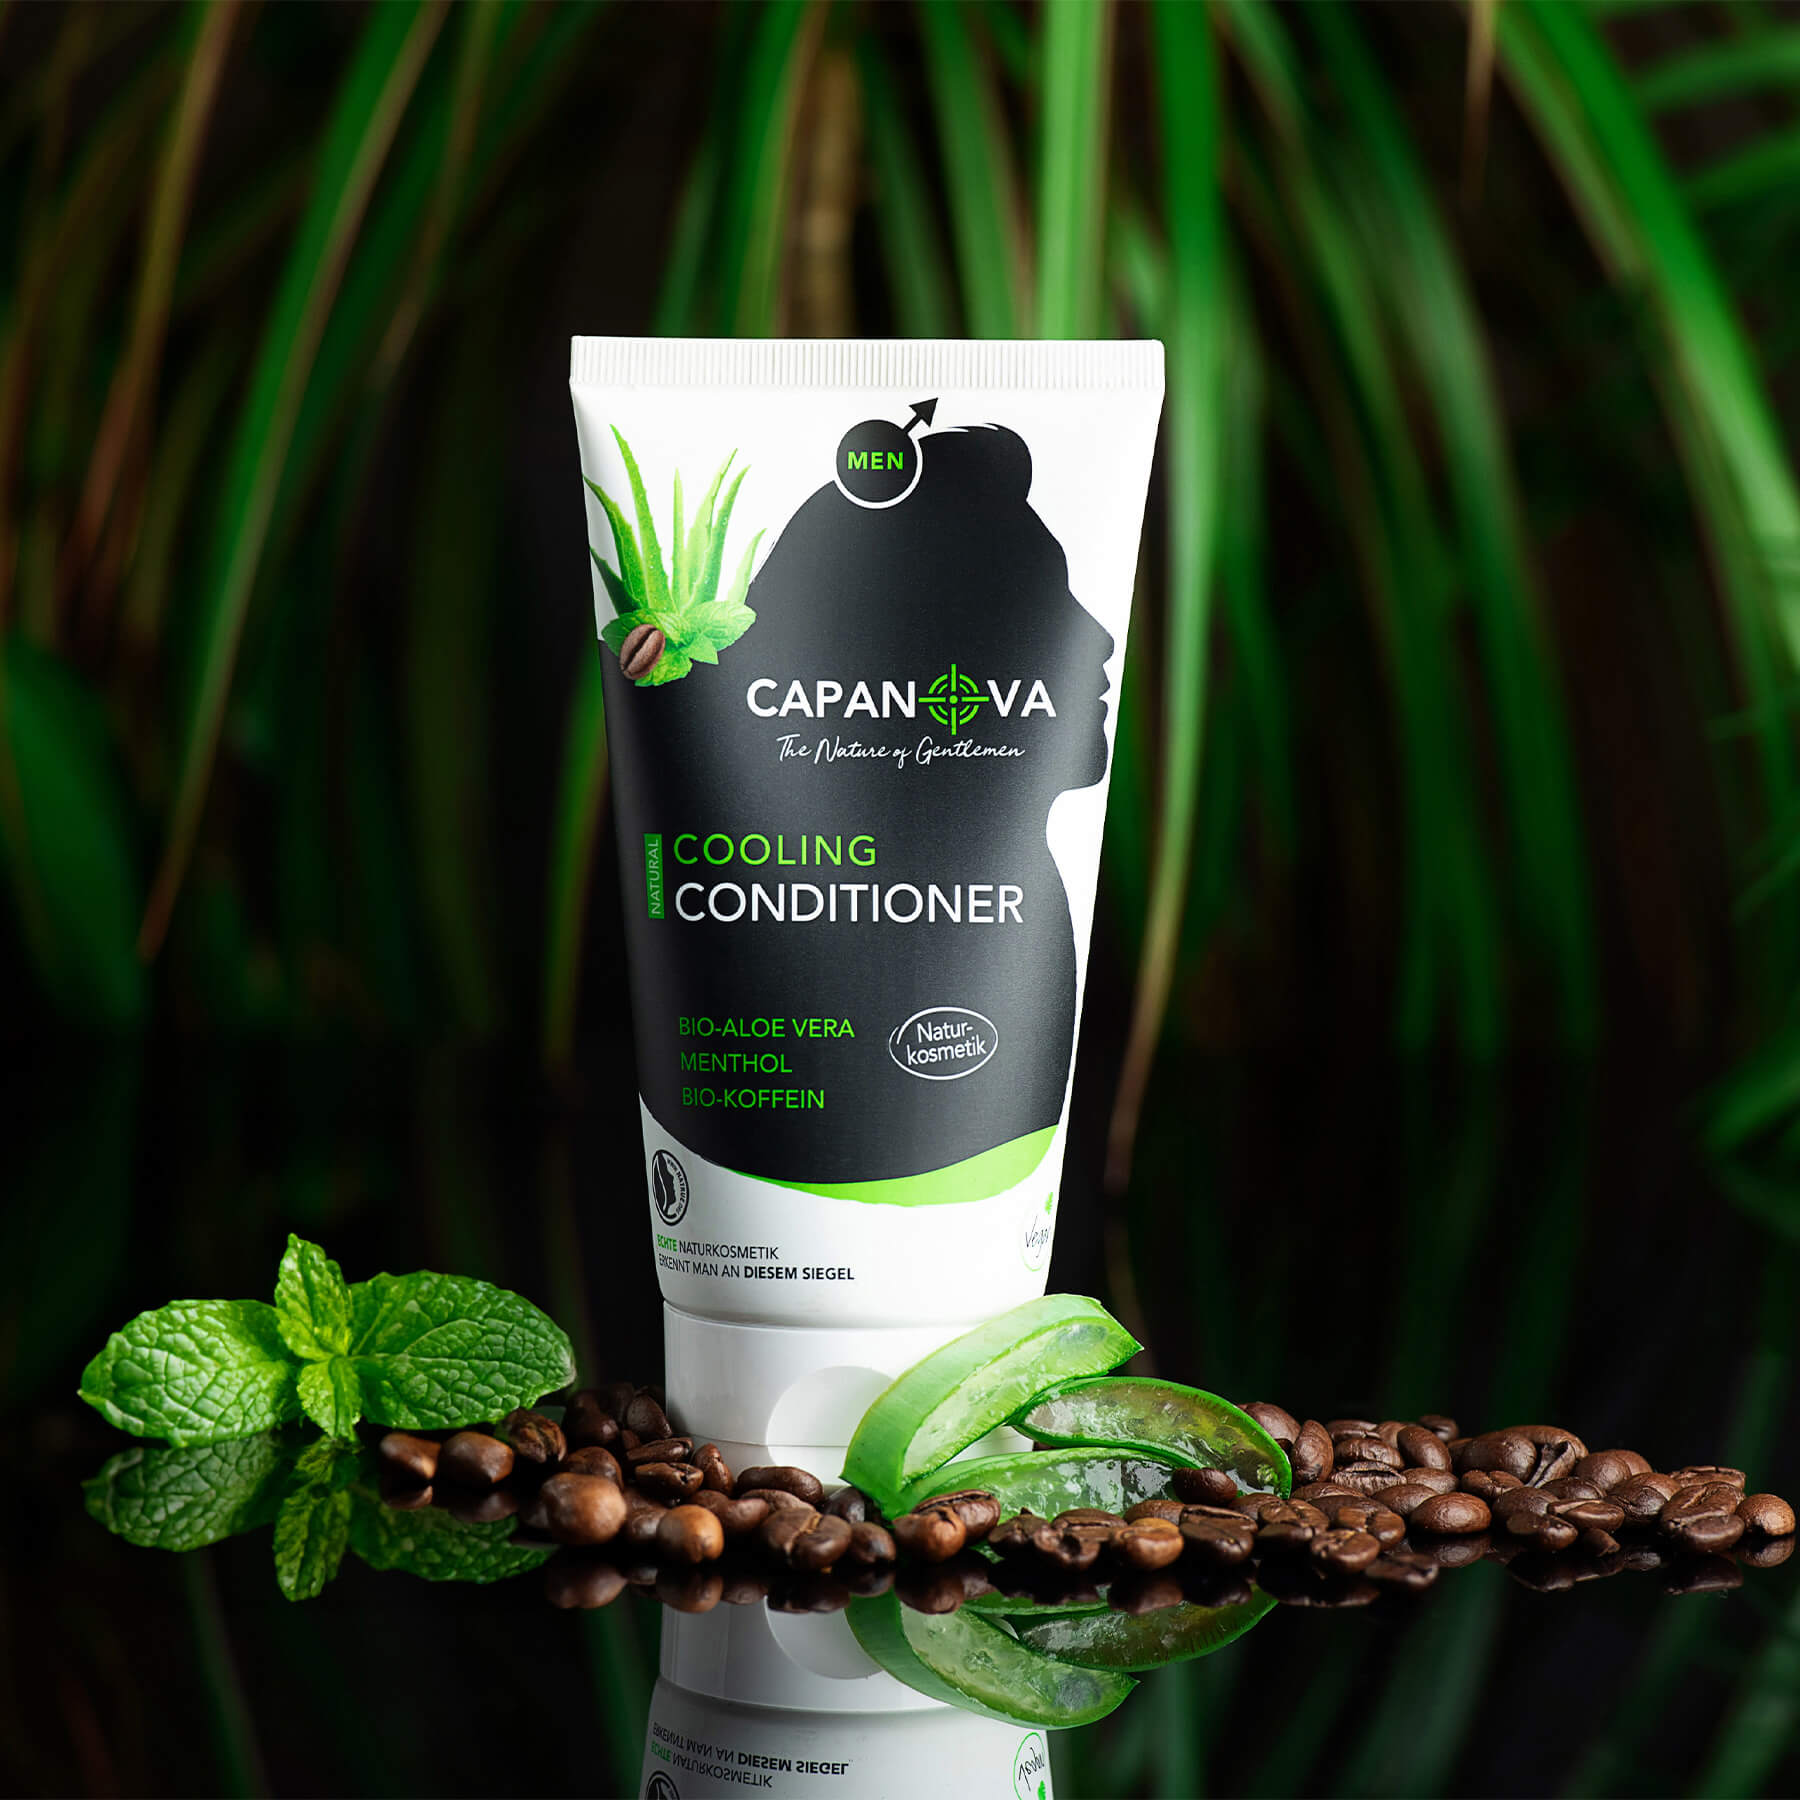 Natural Cooling Conditioner